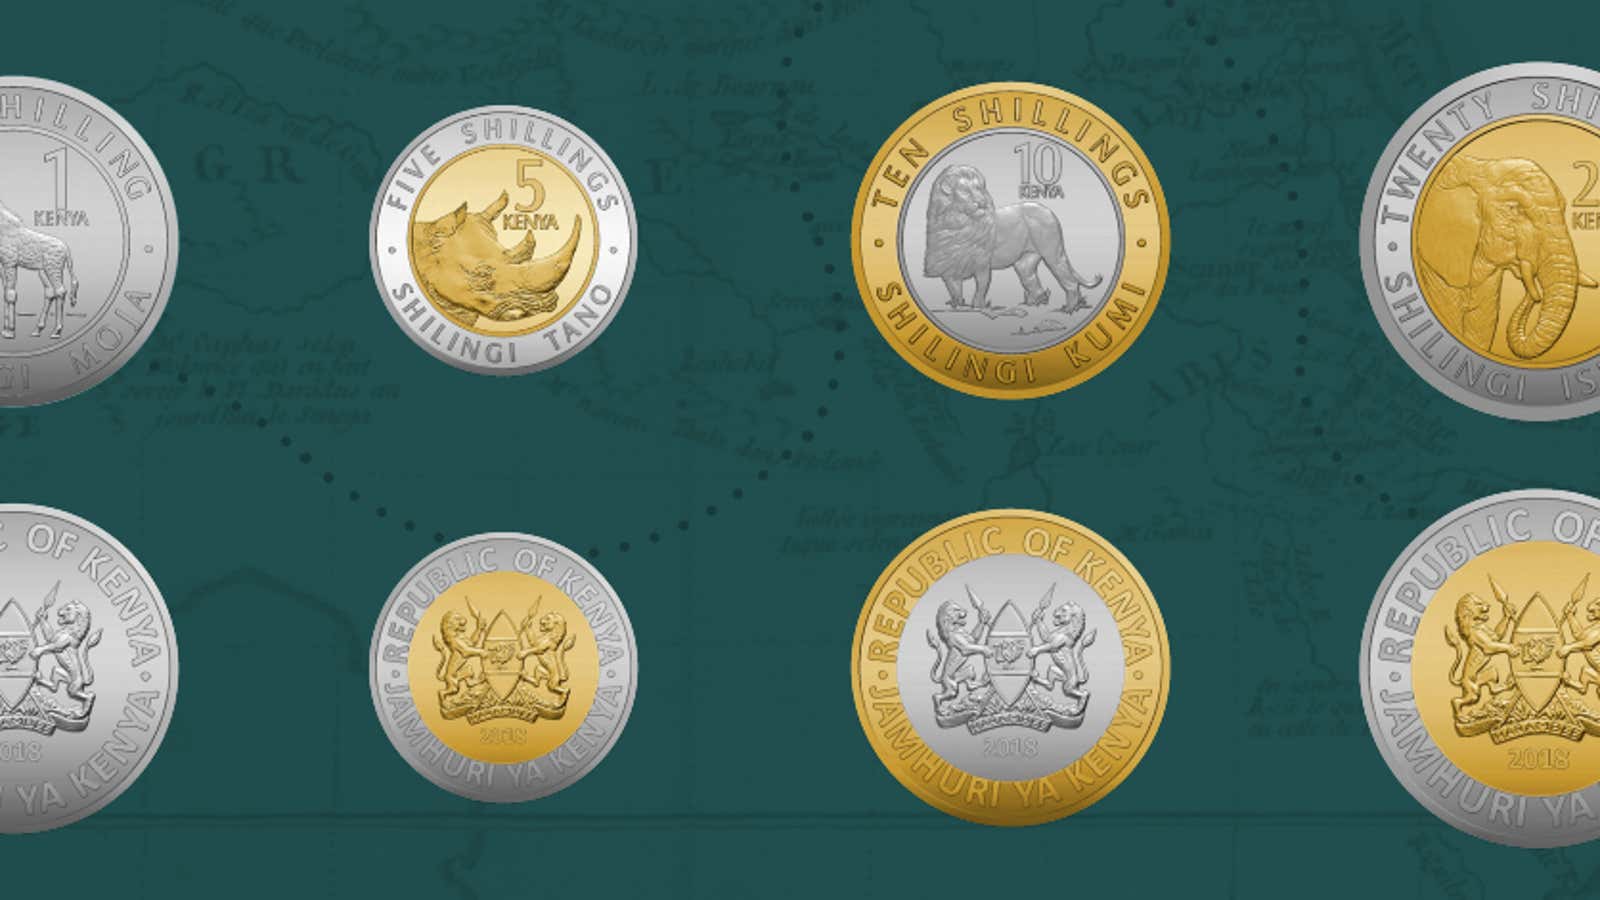 New coins